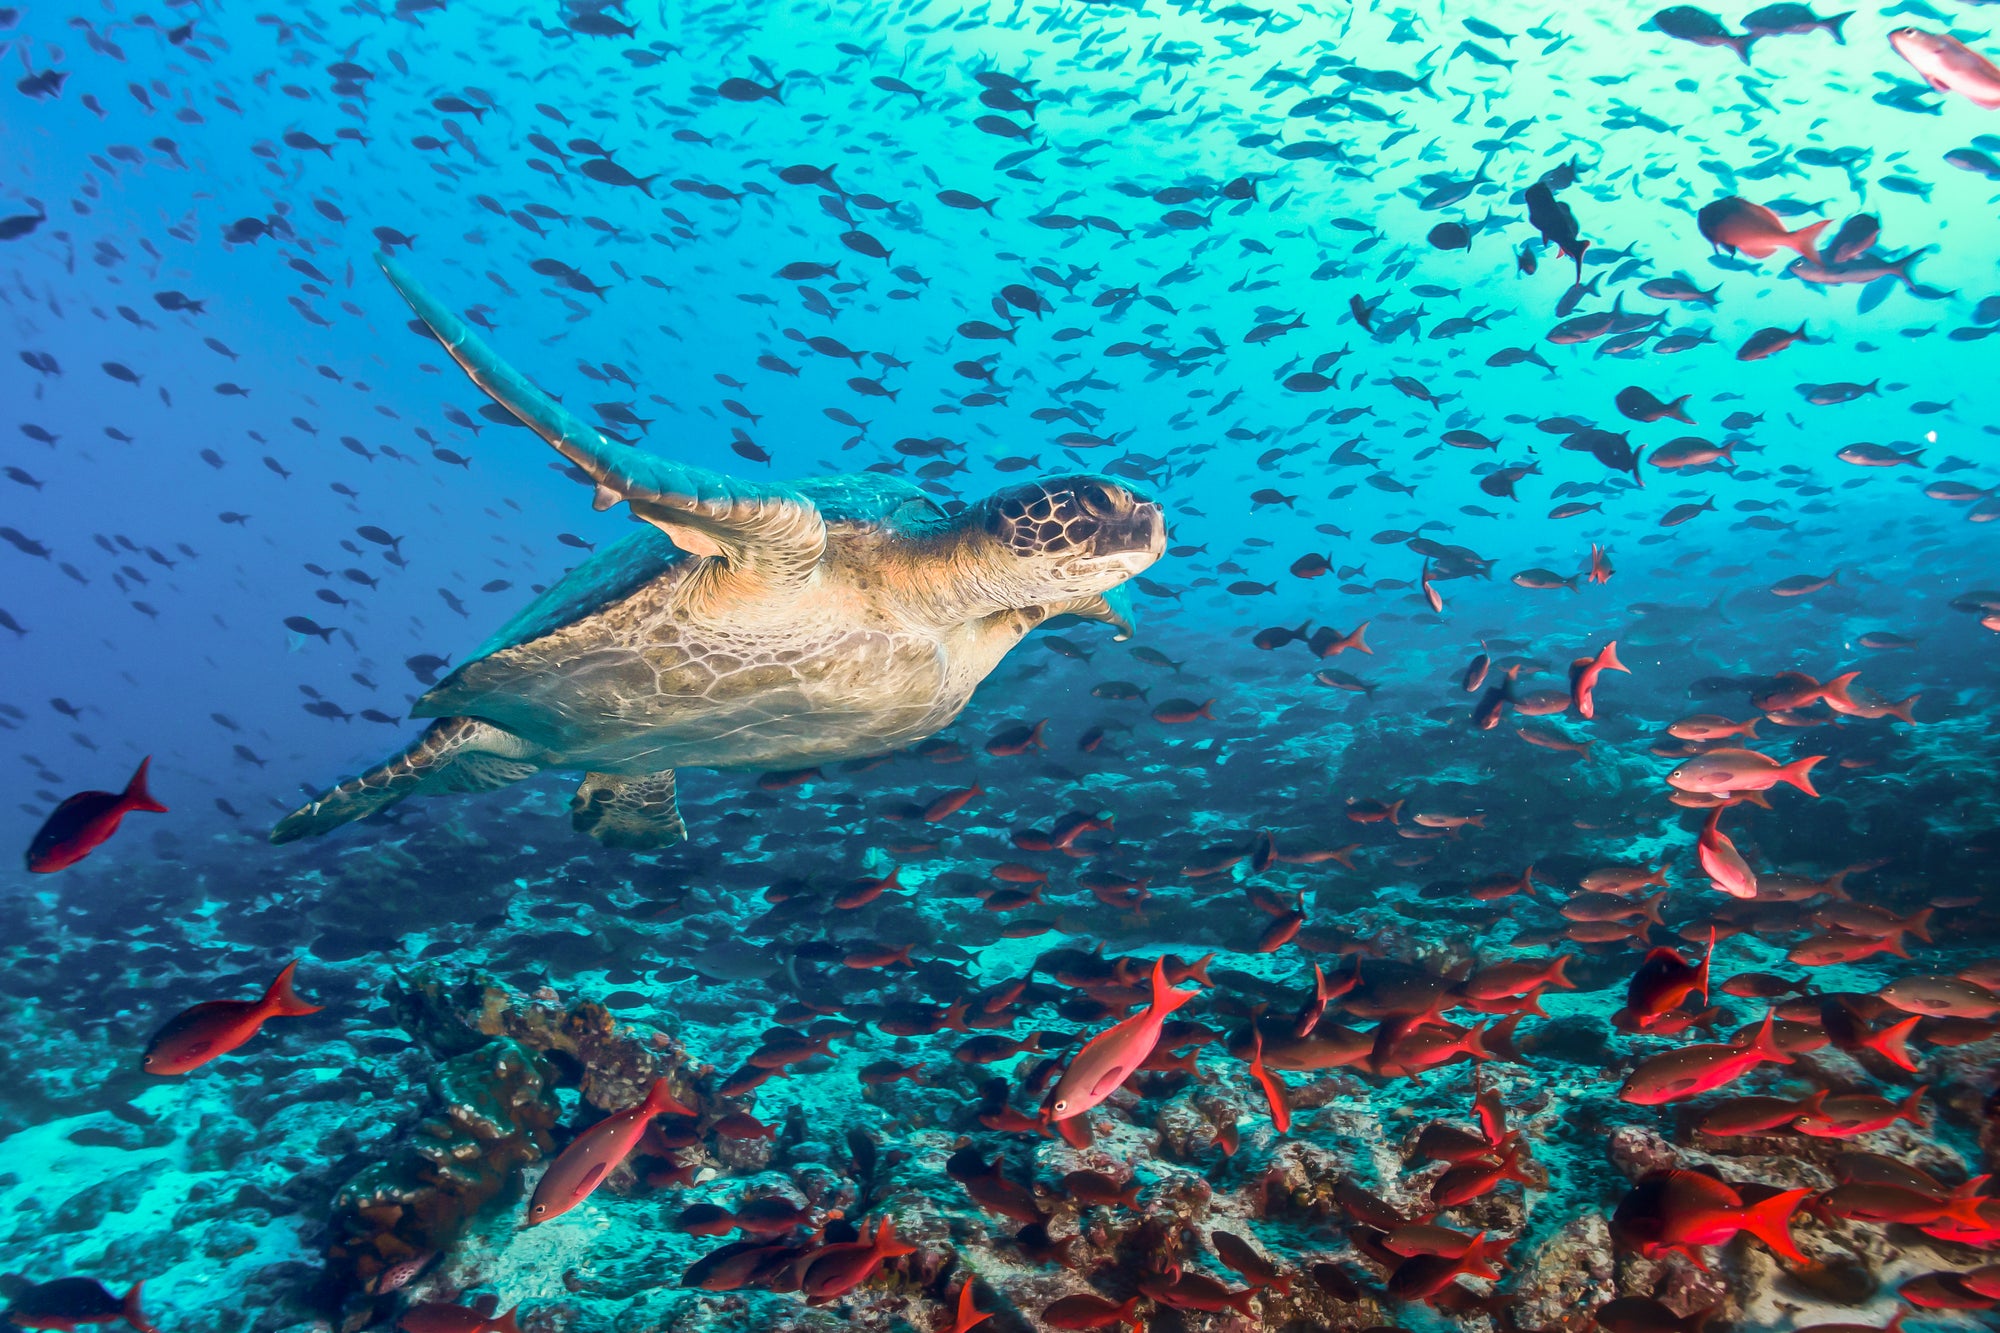 A turtle and lots of fish in the ocean